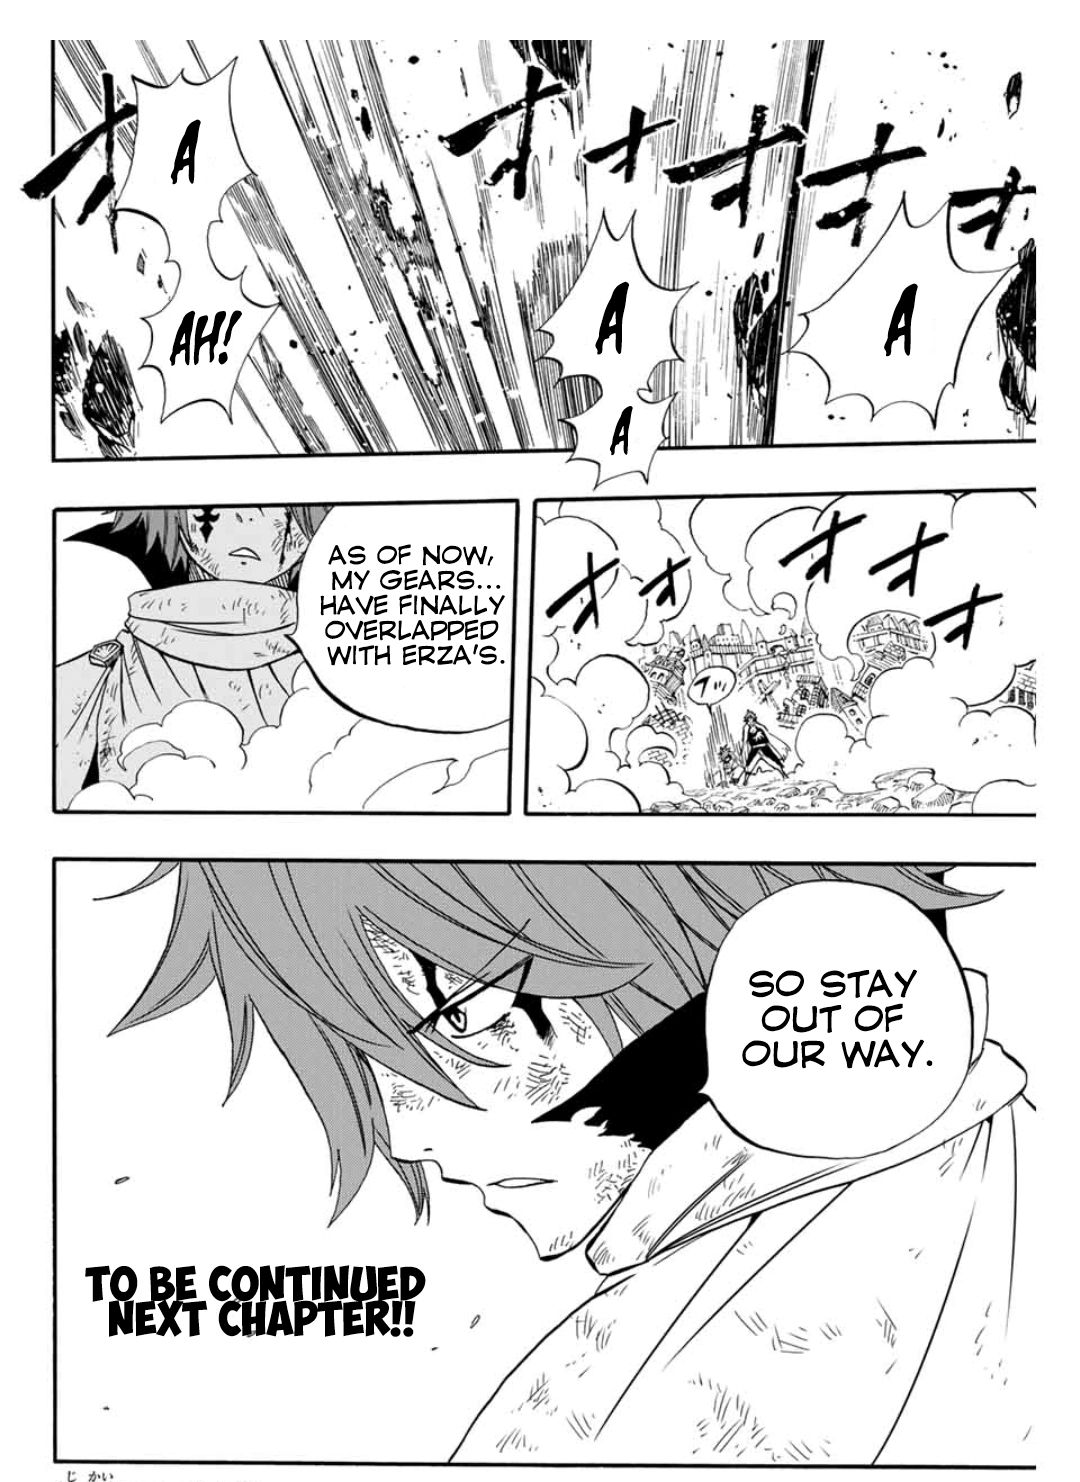 Fairy Tail: 100 Years Quest Chapter 59